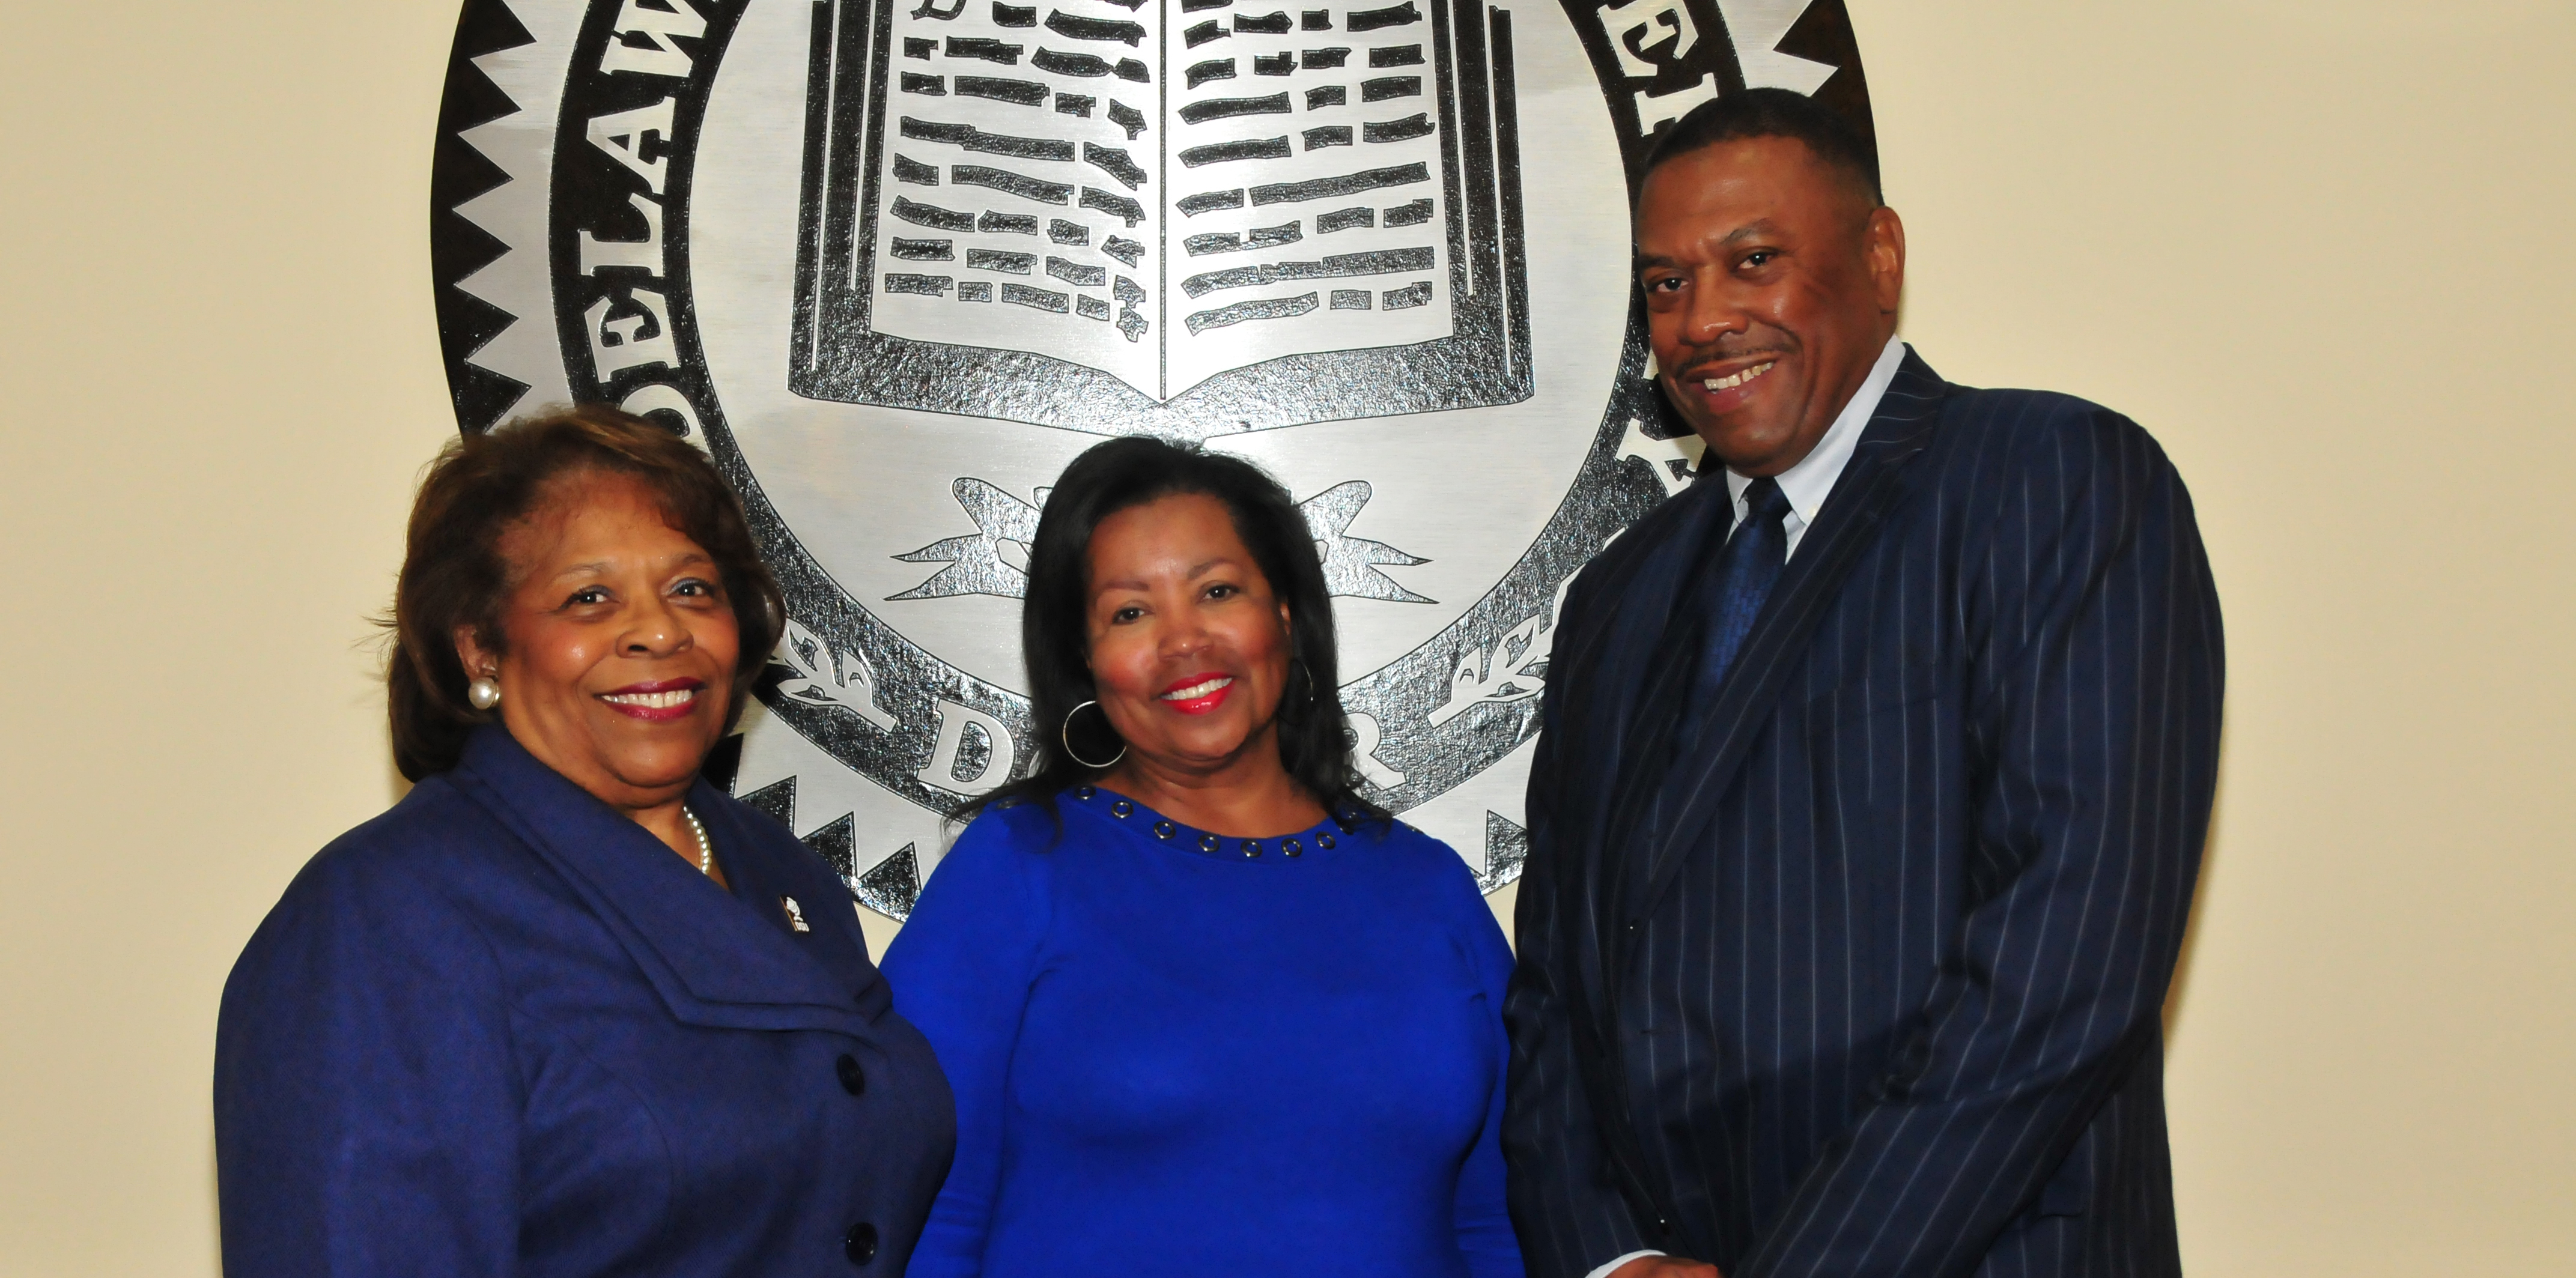 The DSU Board of Trustees has selected Dr. Wilma Mishoe as the interim University president, Dr. Devona Williams as the board's interim chairwoman and John Ridgeway as interim vice chair. Those interim leadership responsibilities will commence when current DSU President Harry L. Williams leaves the institution in January to become the CEO/president of the Thurgood Marshall College Fund. 